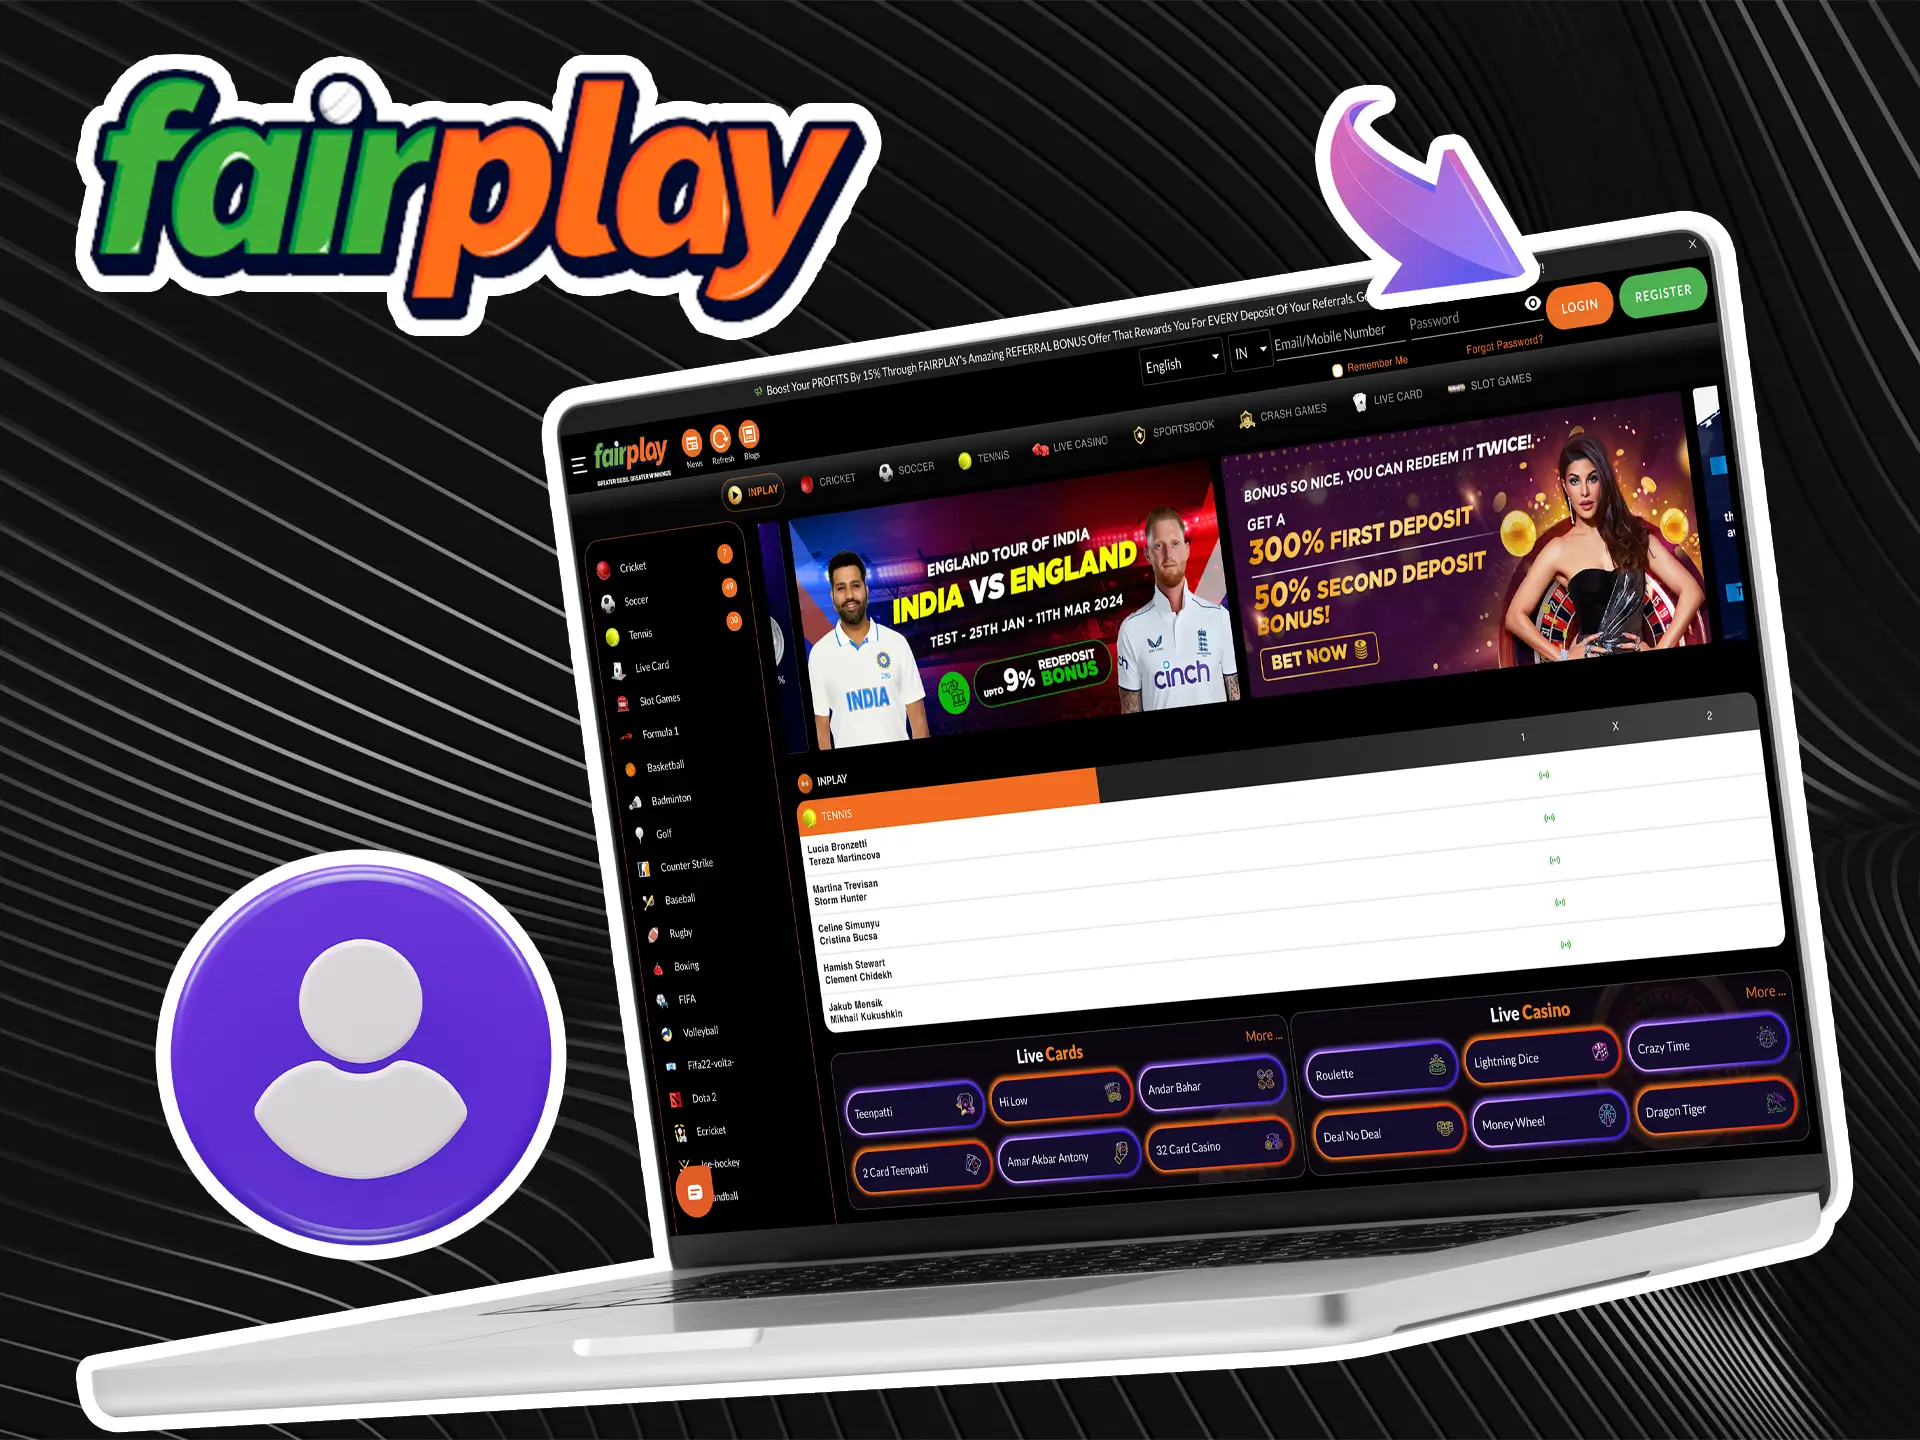 Log in to your personal account to access all the features of the Fairplay website.